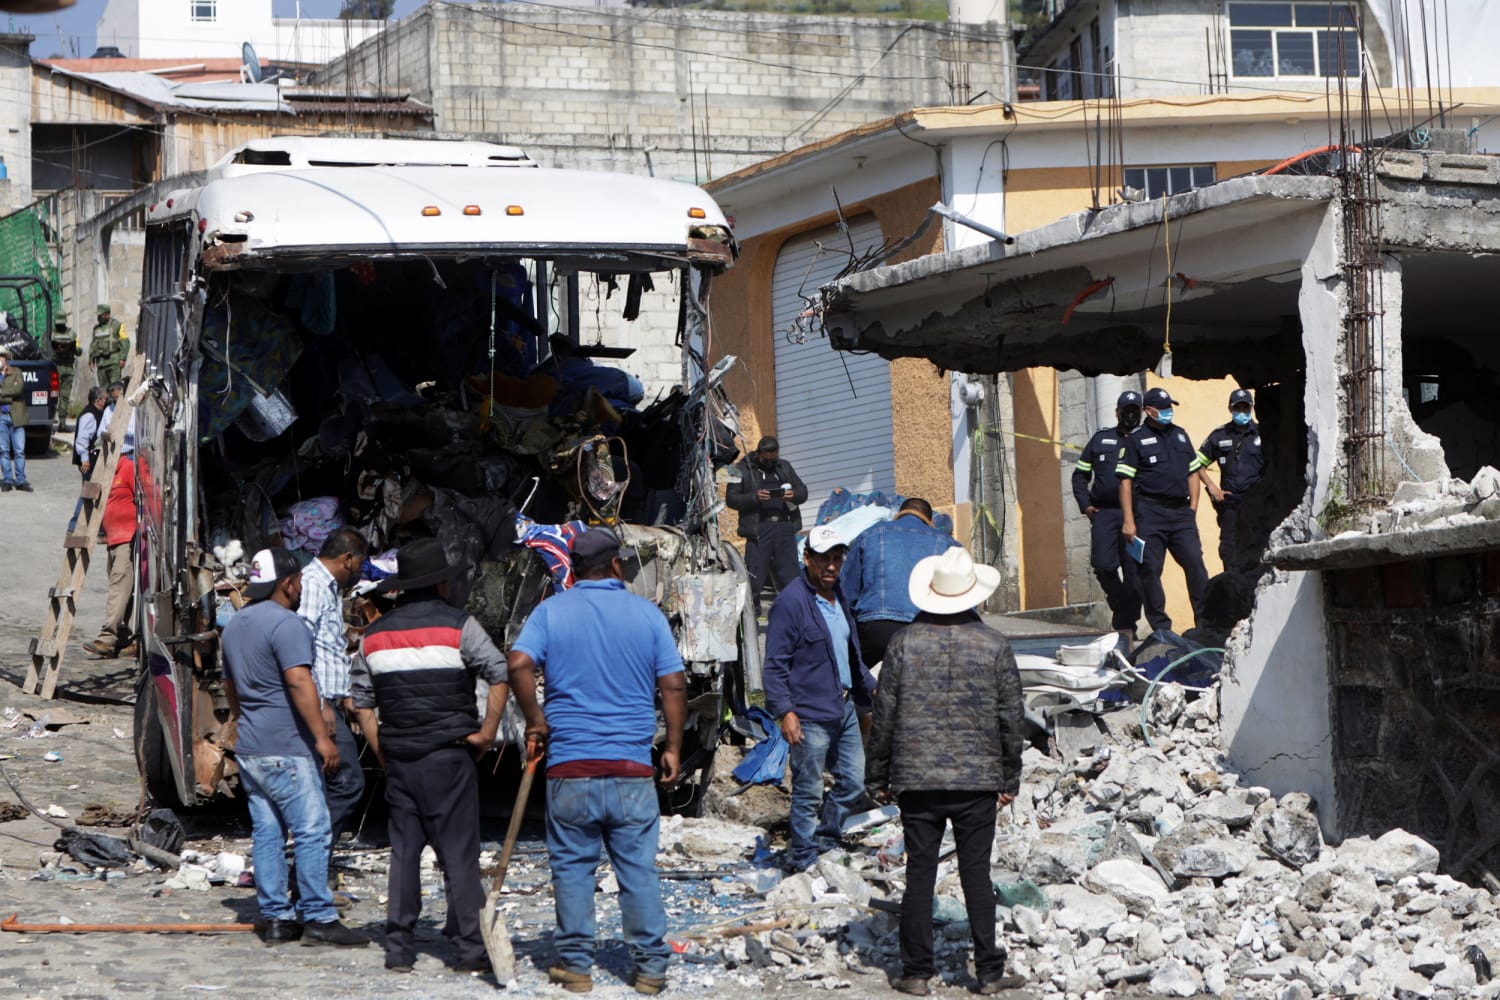 19 People Dead, 32 Injured After Bus Crash in Central Mexico